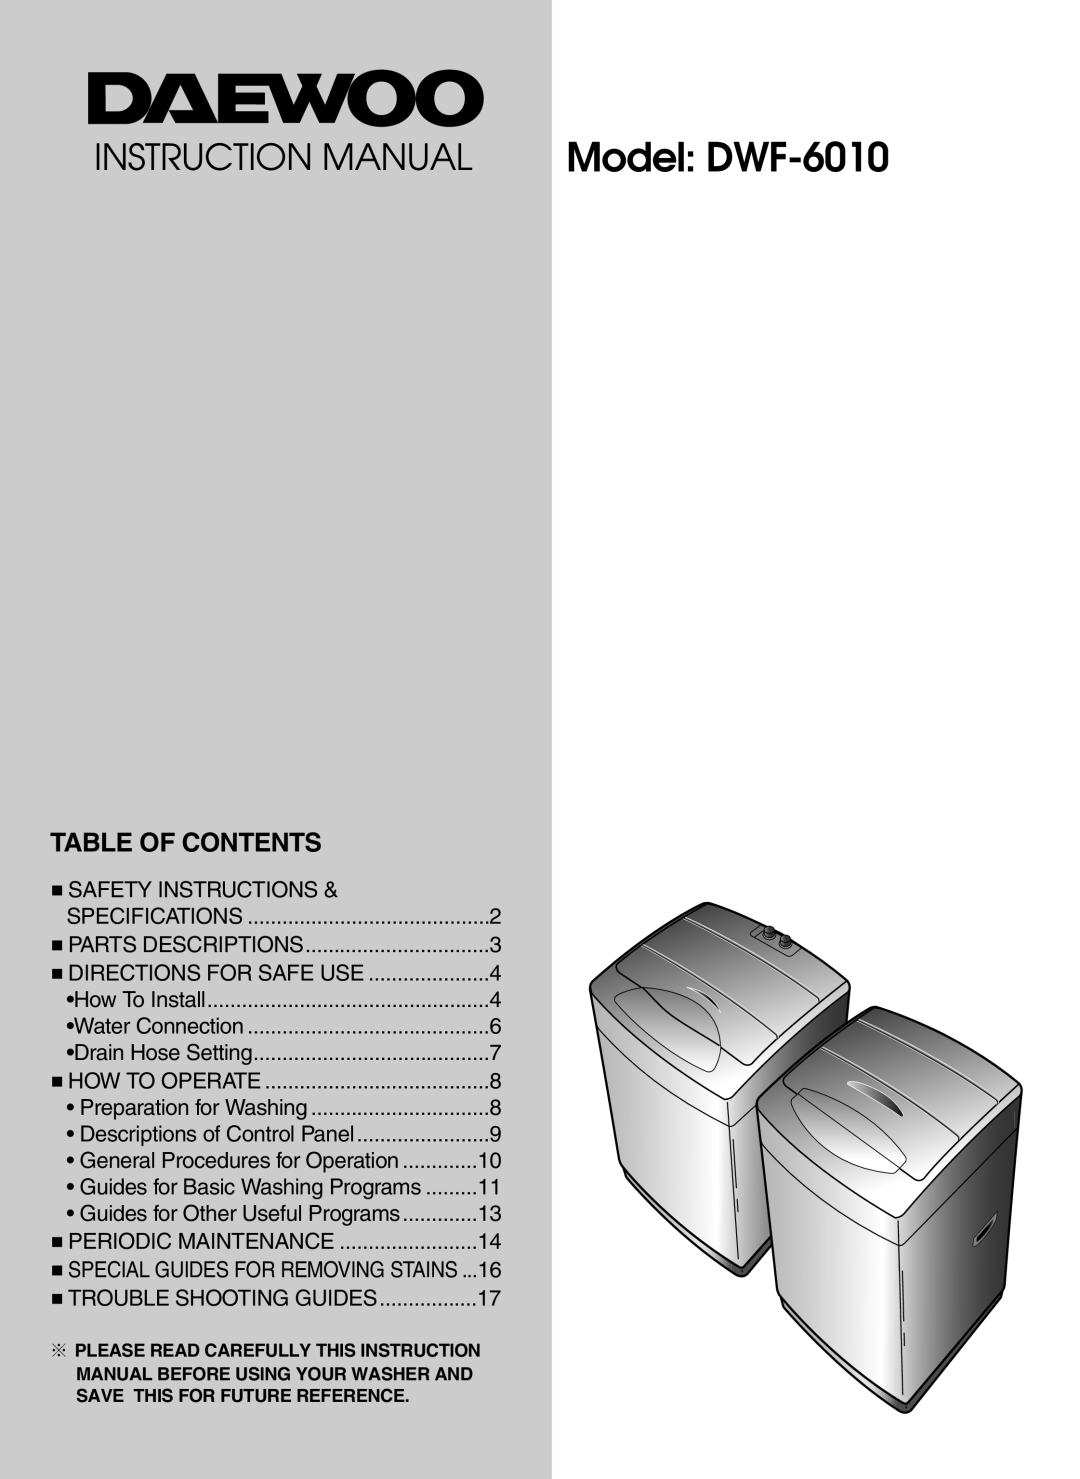 Daewoo instruction manual Table Of Contents, Model DWF-6010 